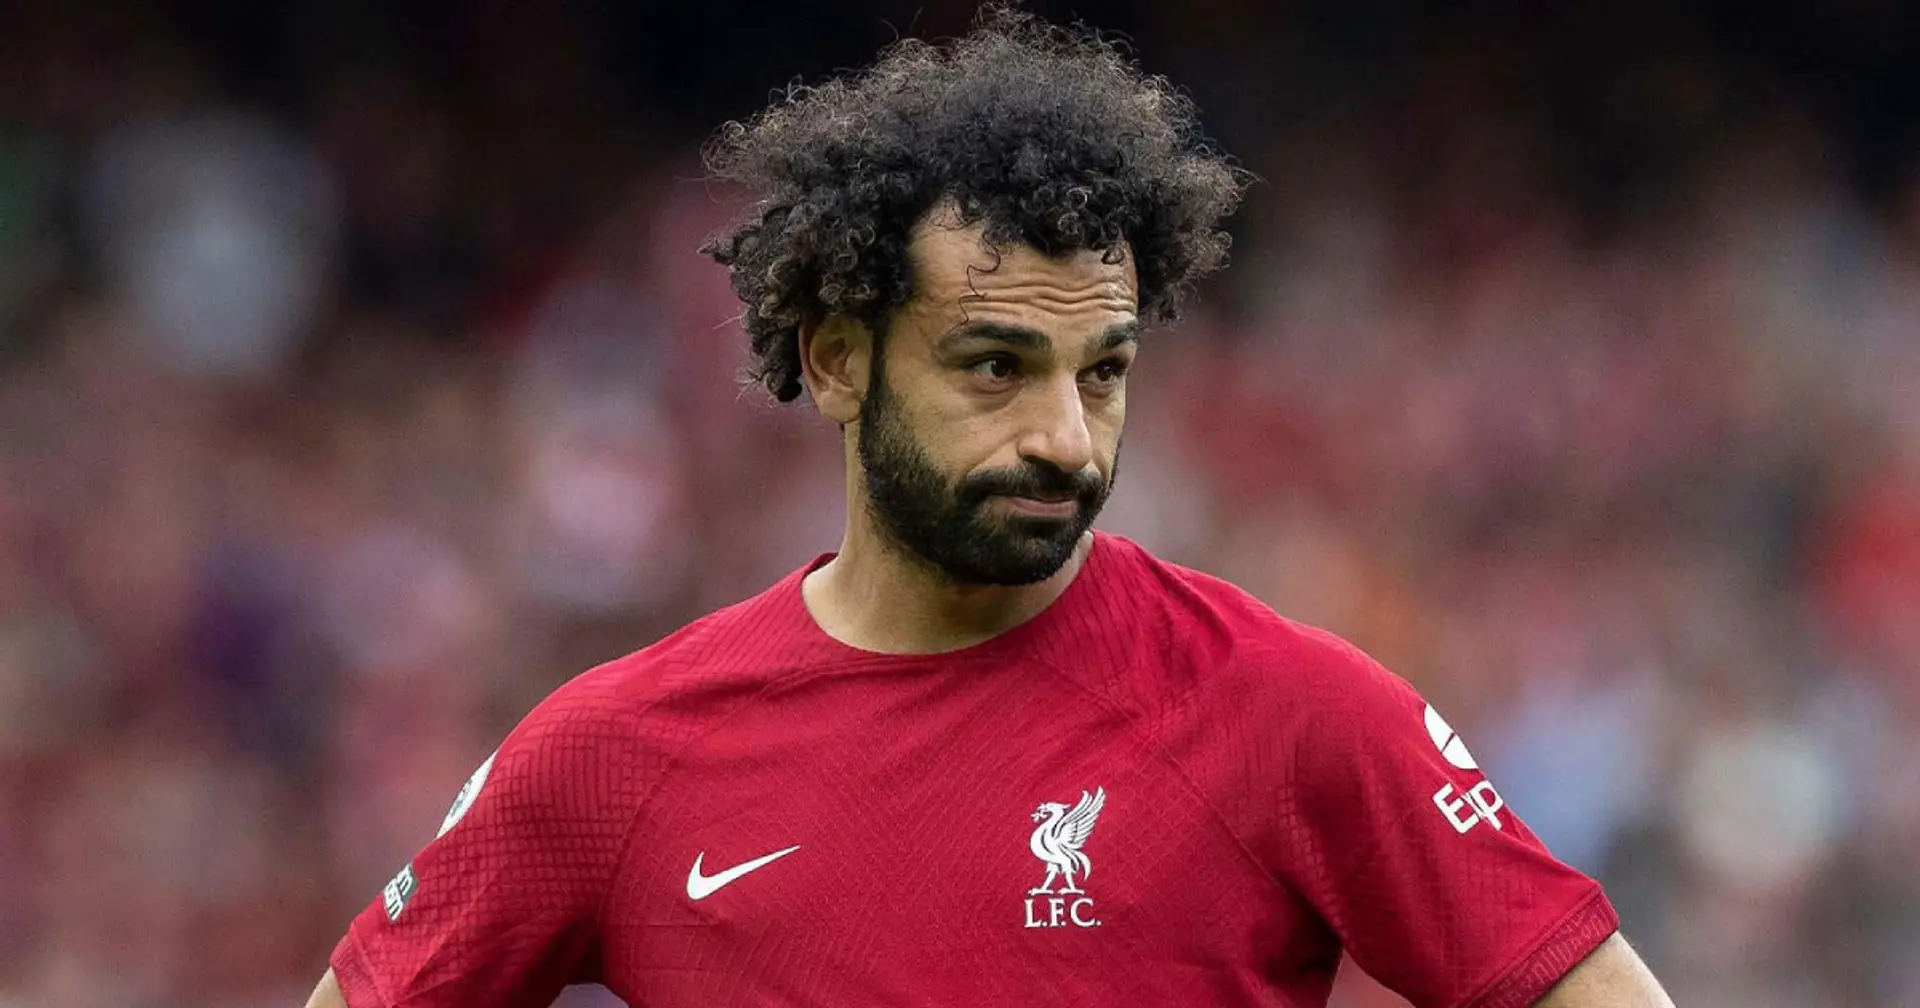 Arsenal away & 5 more Liverpool games Salah could miss as injury more serious than expected